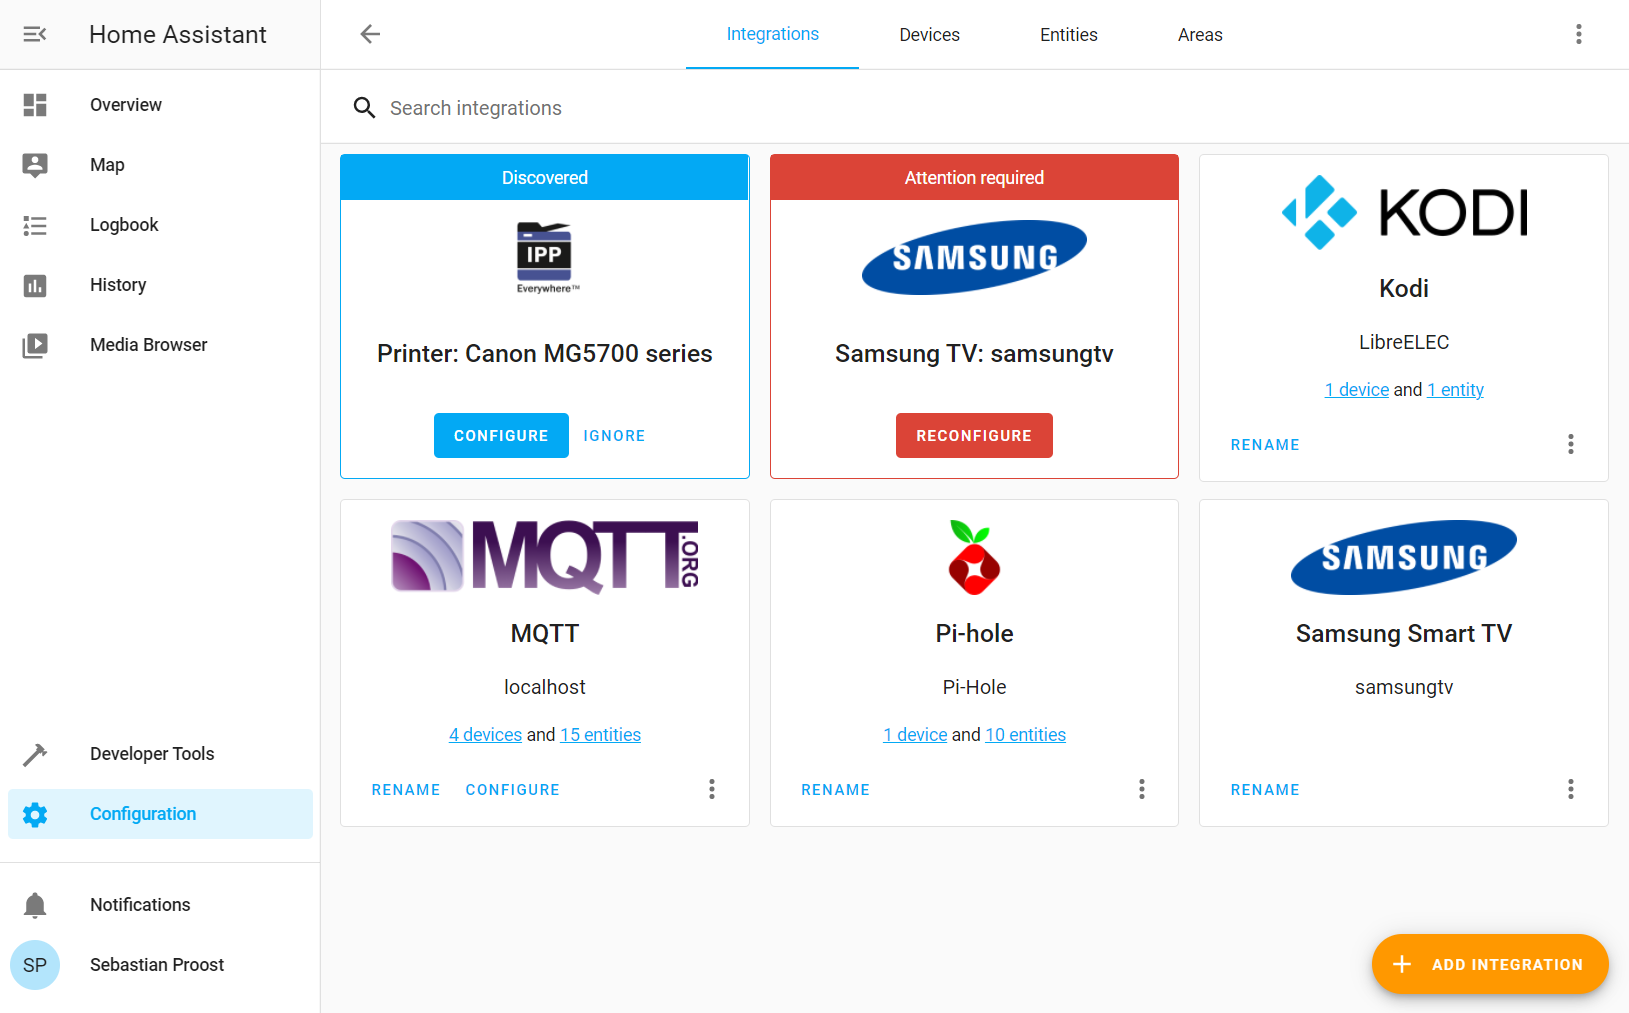 Integrations page shows that there are now 4 MQTT devices available, two from the previous post and two new ones